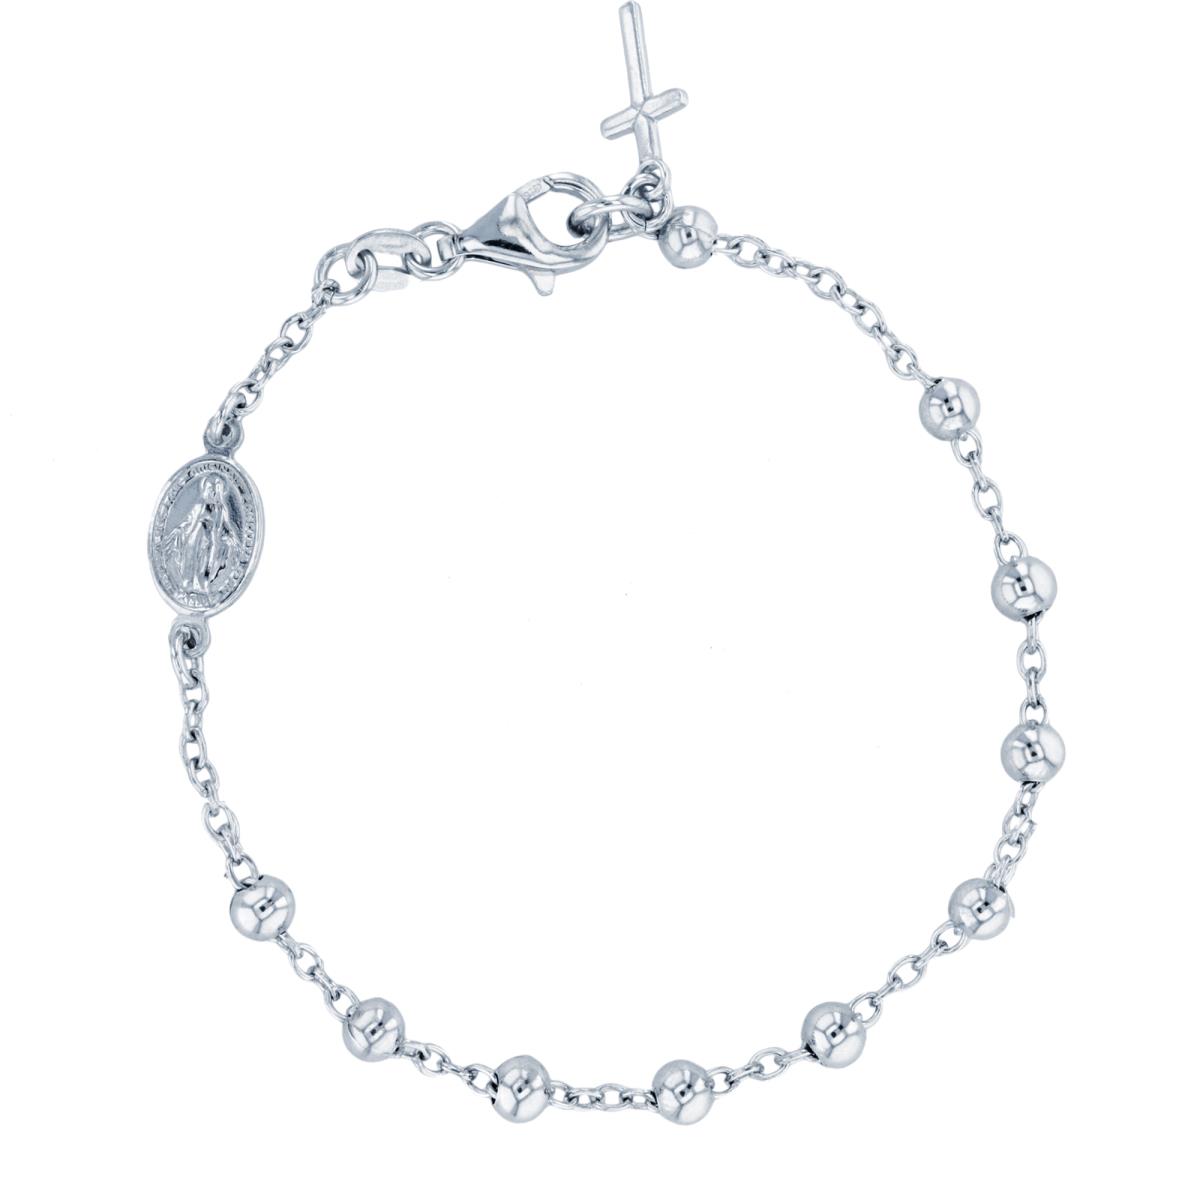 Sterling Silver Rhodium 4mm Beads Virgin Mary 7.25" Bracelet with Dangling Cross